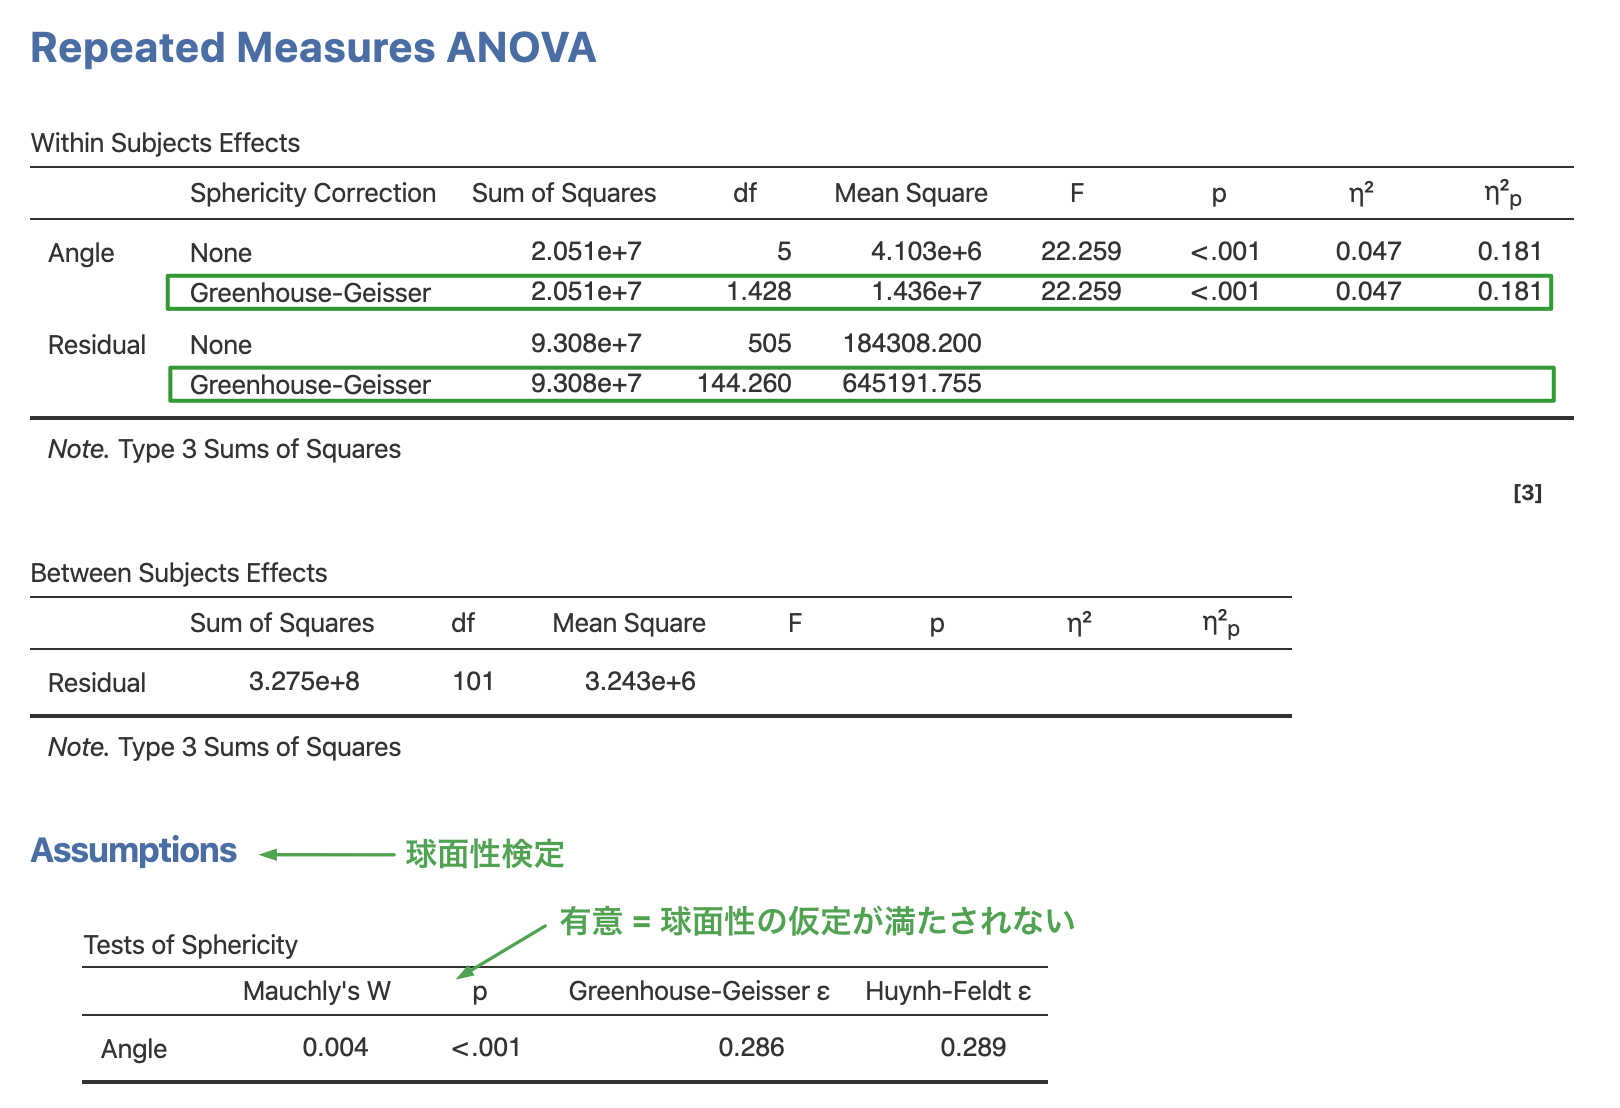 Resulsts - Repeated Measures ANOVA